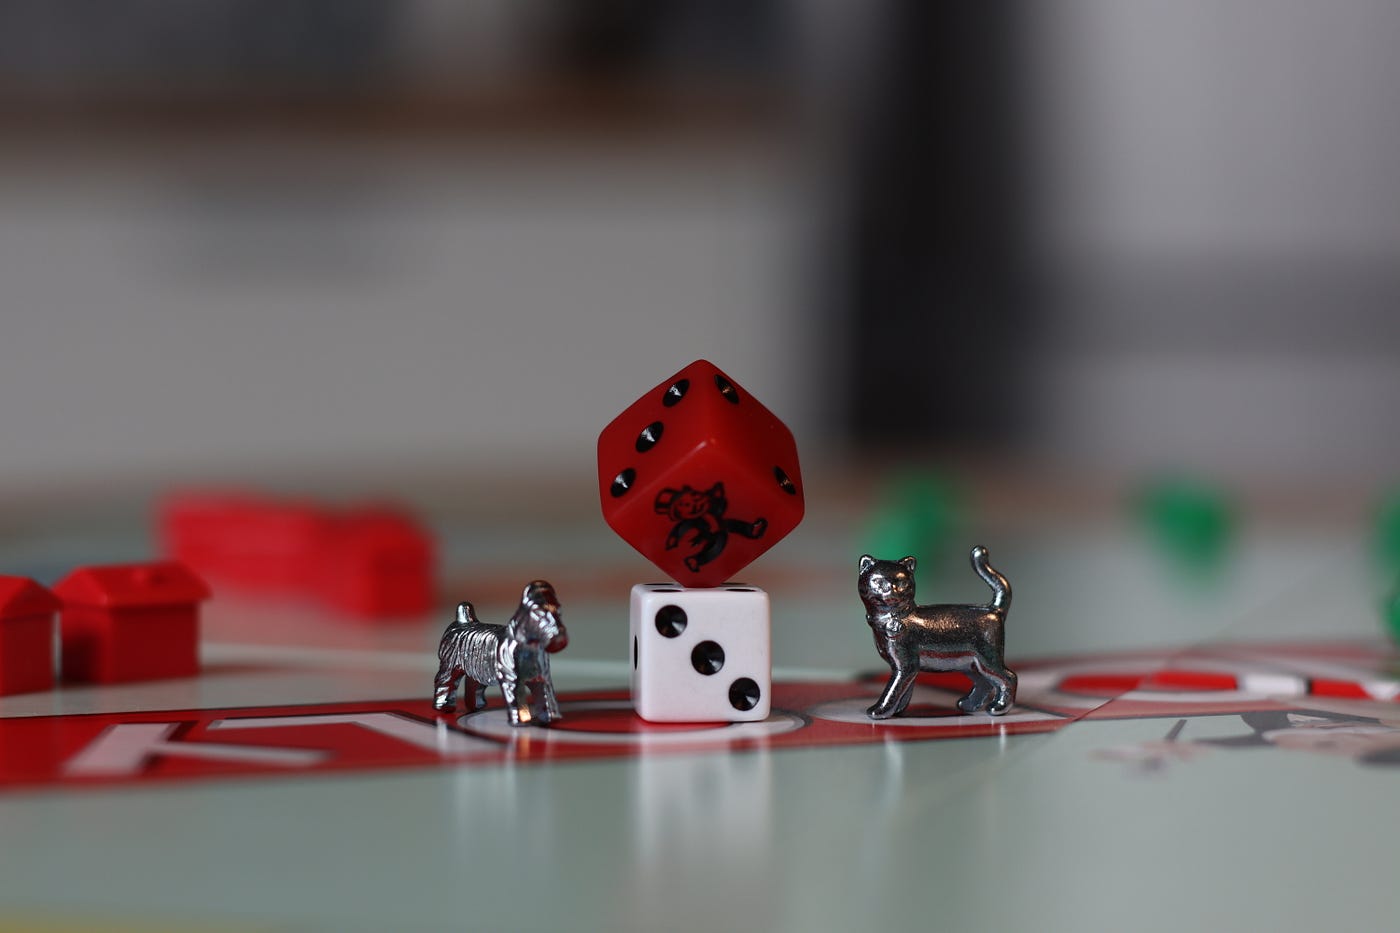 Monopoly game pieces, including a white dice in the center of the image (and a diagonal red dice balanced on it). There is a small silver dog to the left of the die and a silver cat to the right of it. All sit on a board with the word “Monopoly” partially visualized. Leisure activities are associated with a lower risk of dementia, according to a new large review.